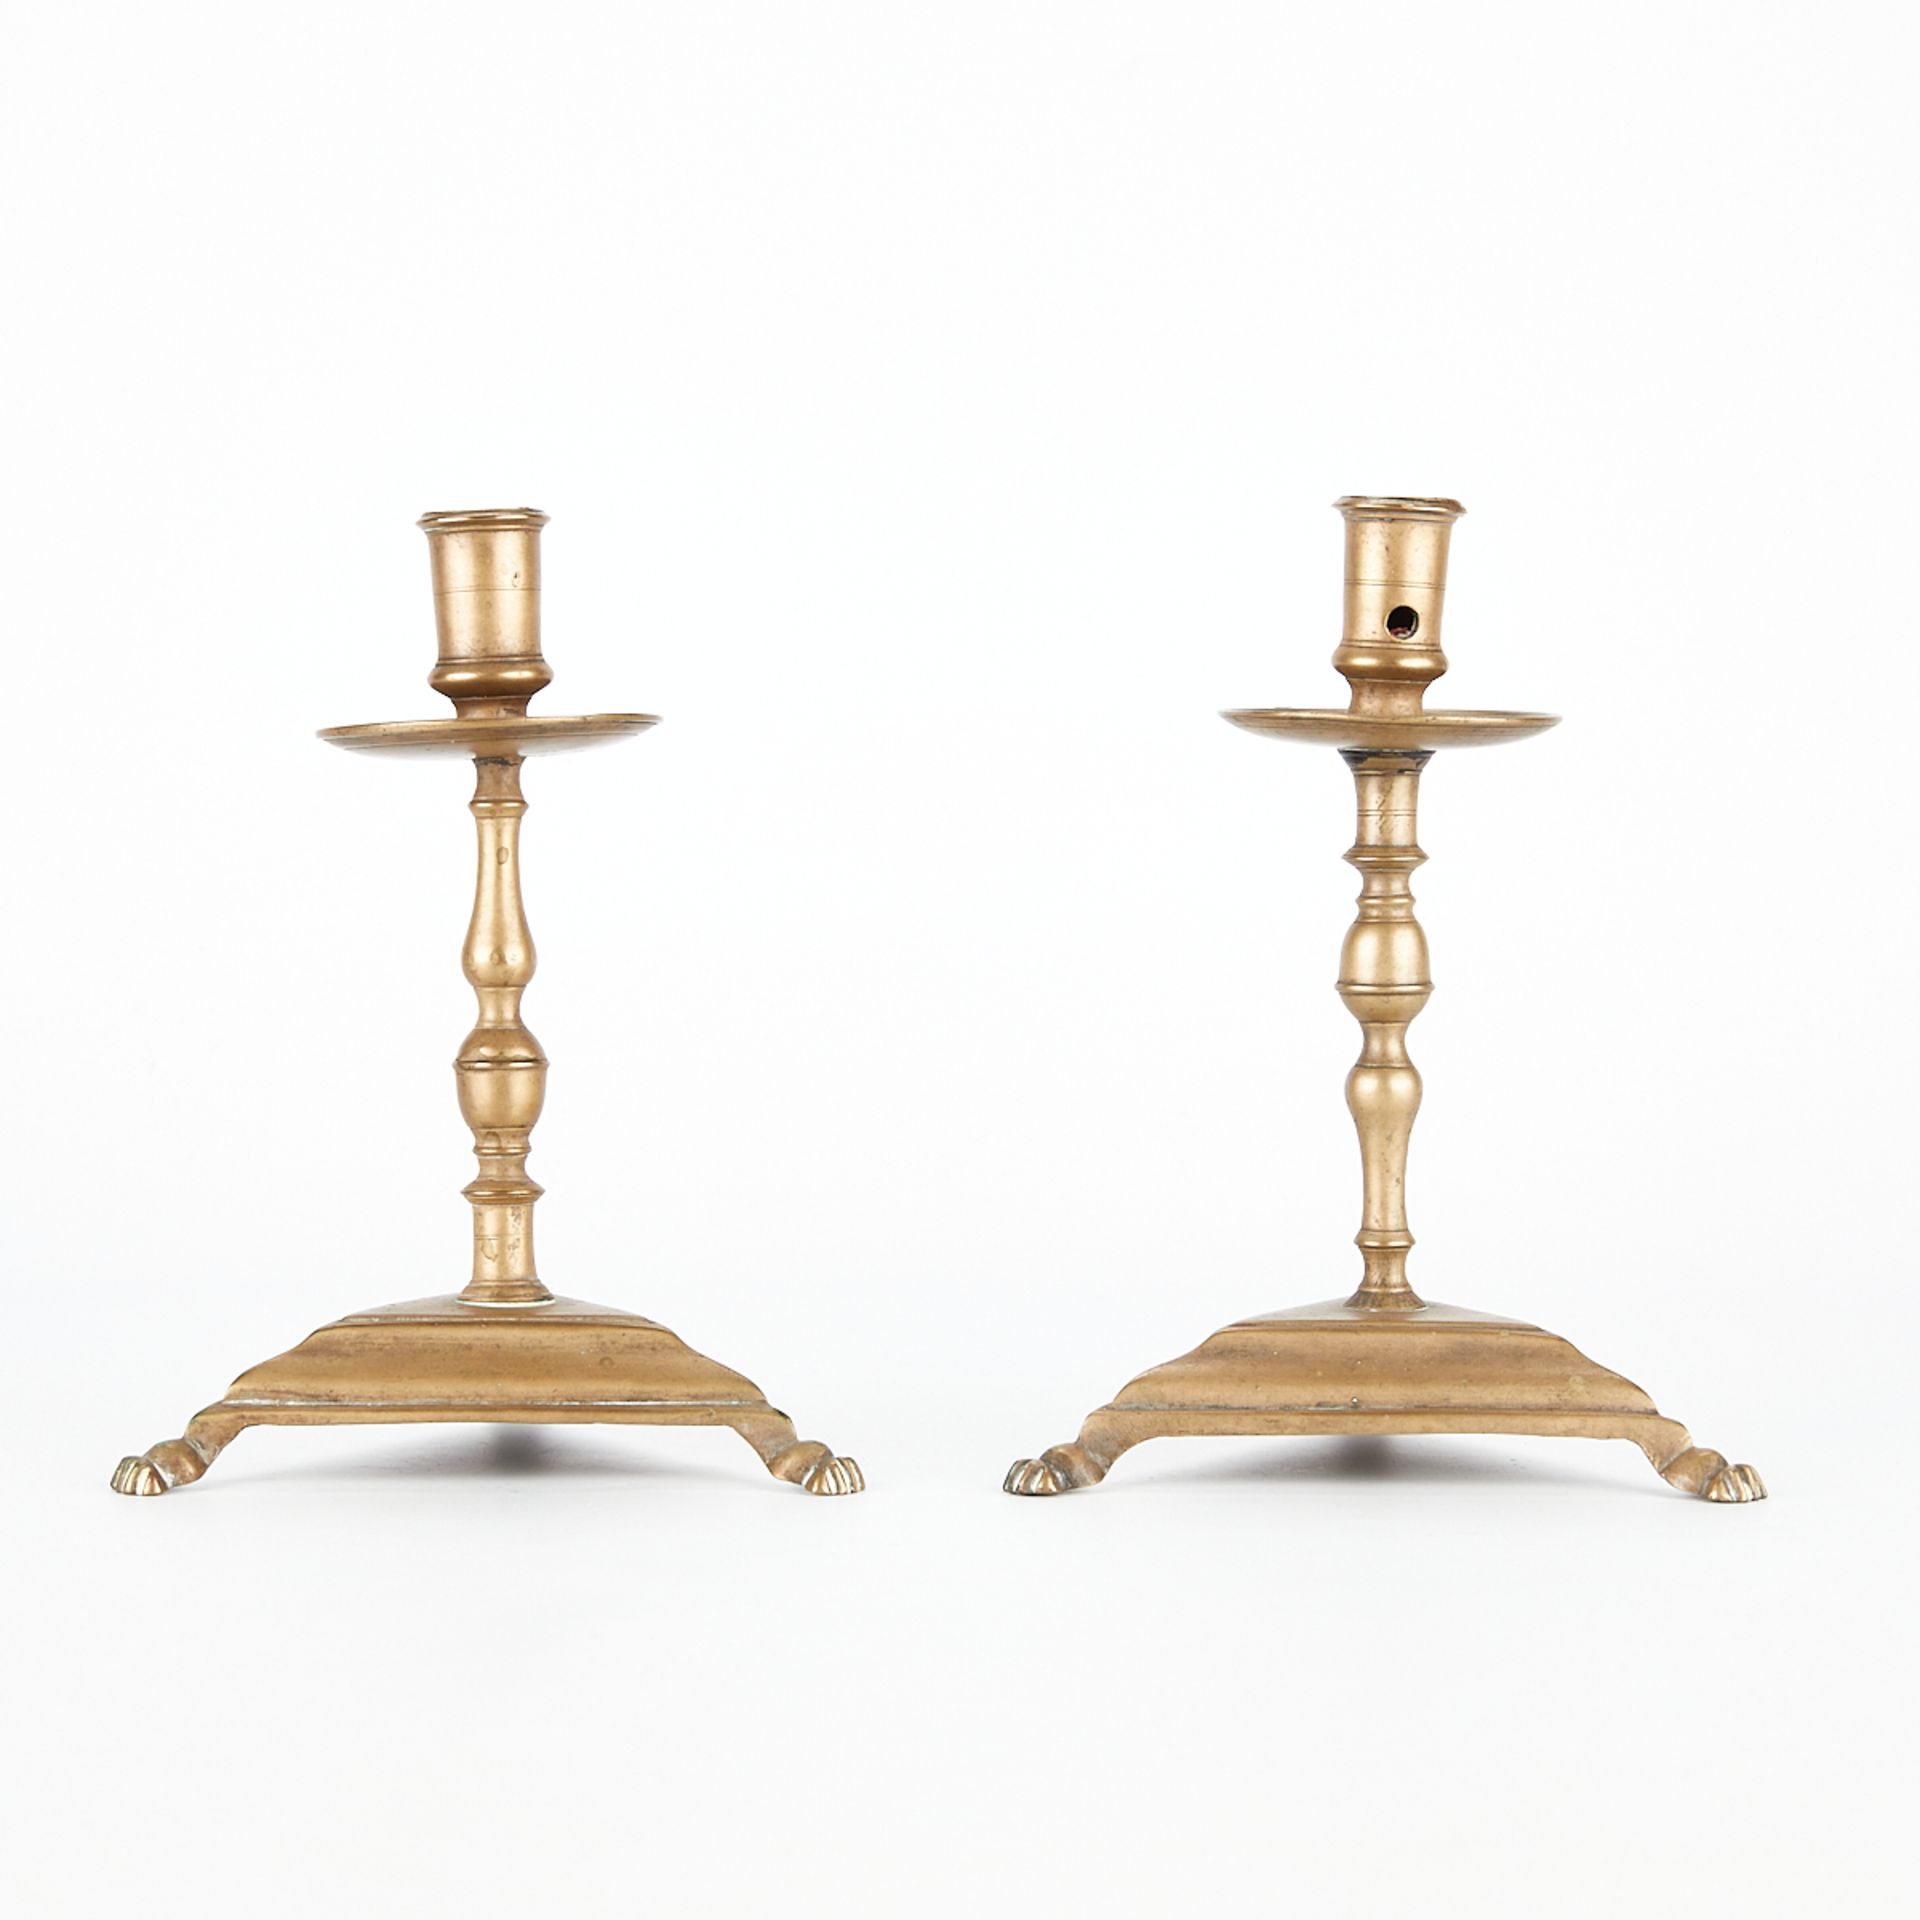 Pair of 17th c. Brass Spanish Candlesticks - Image 3 of 8